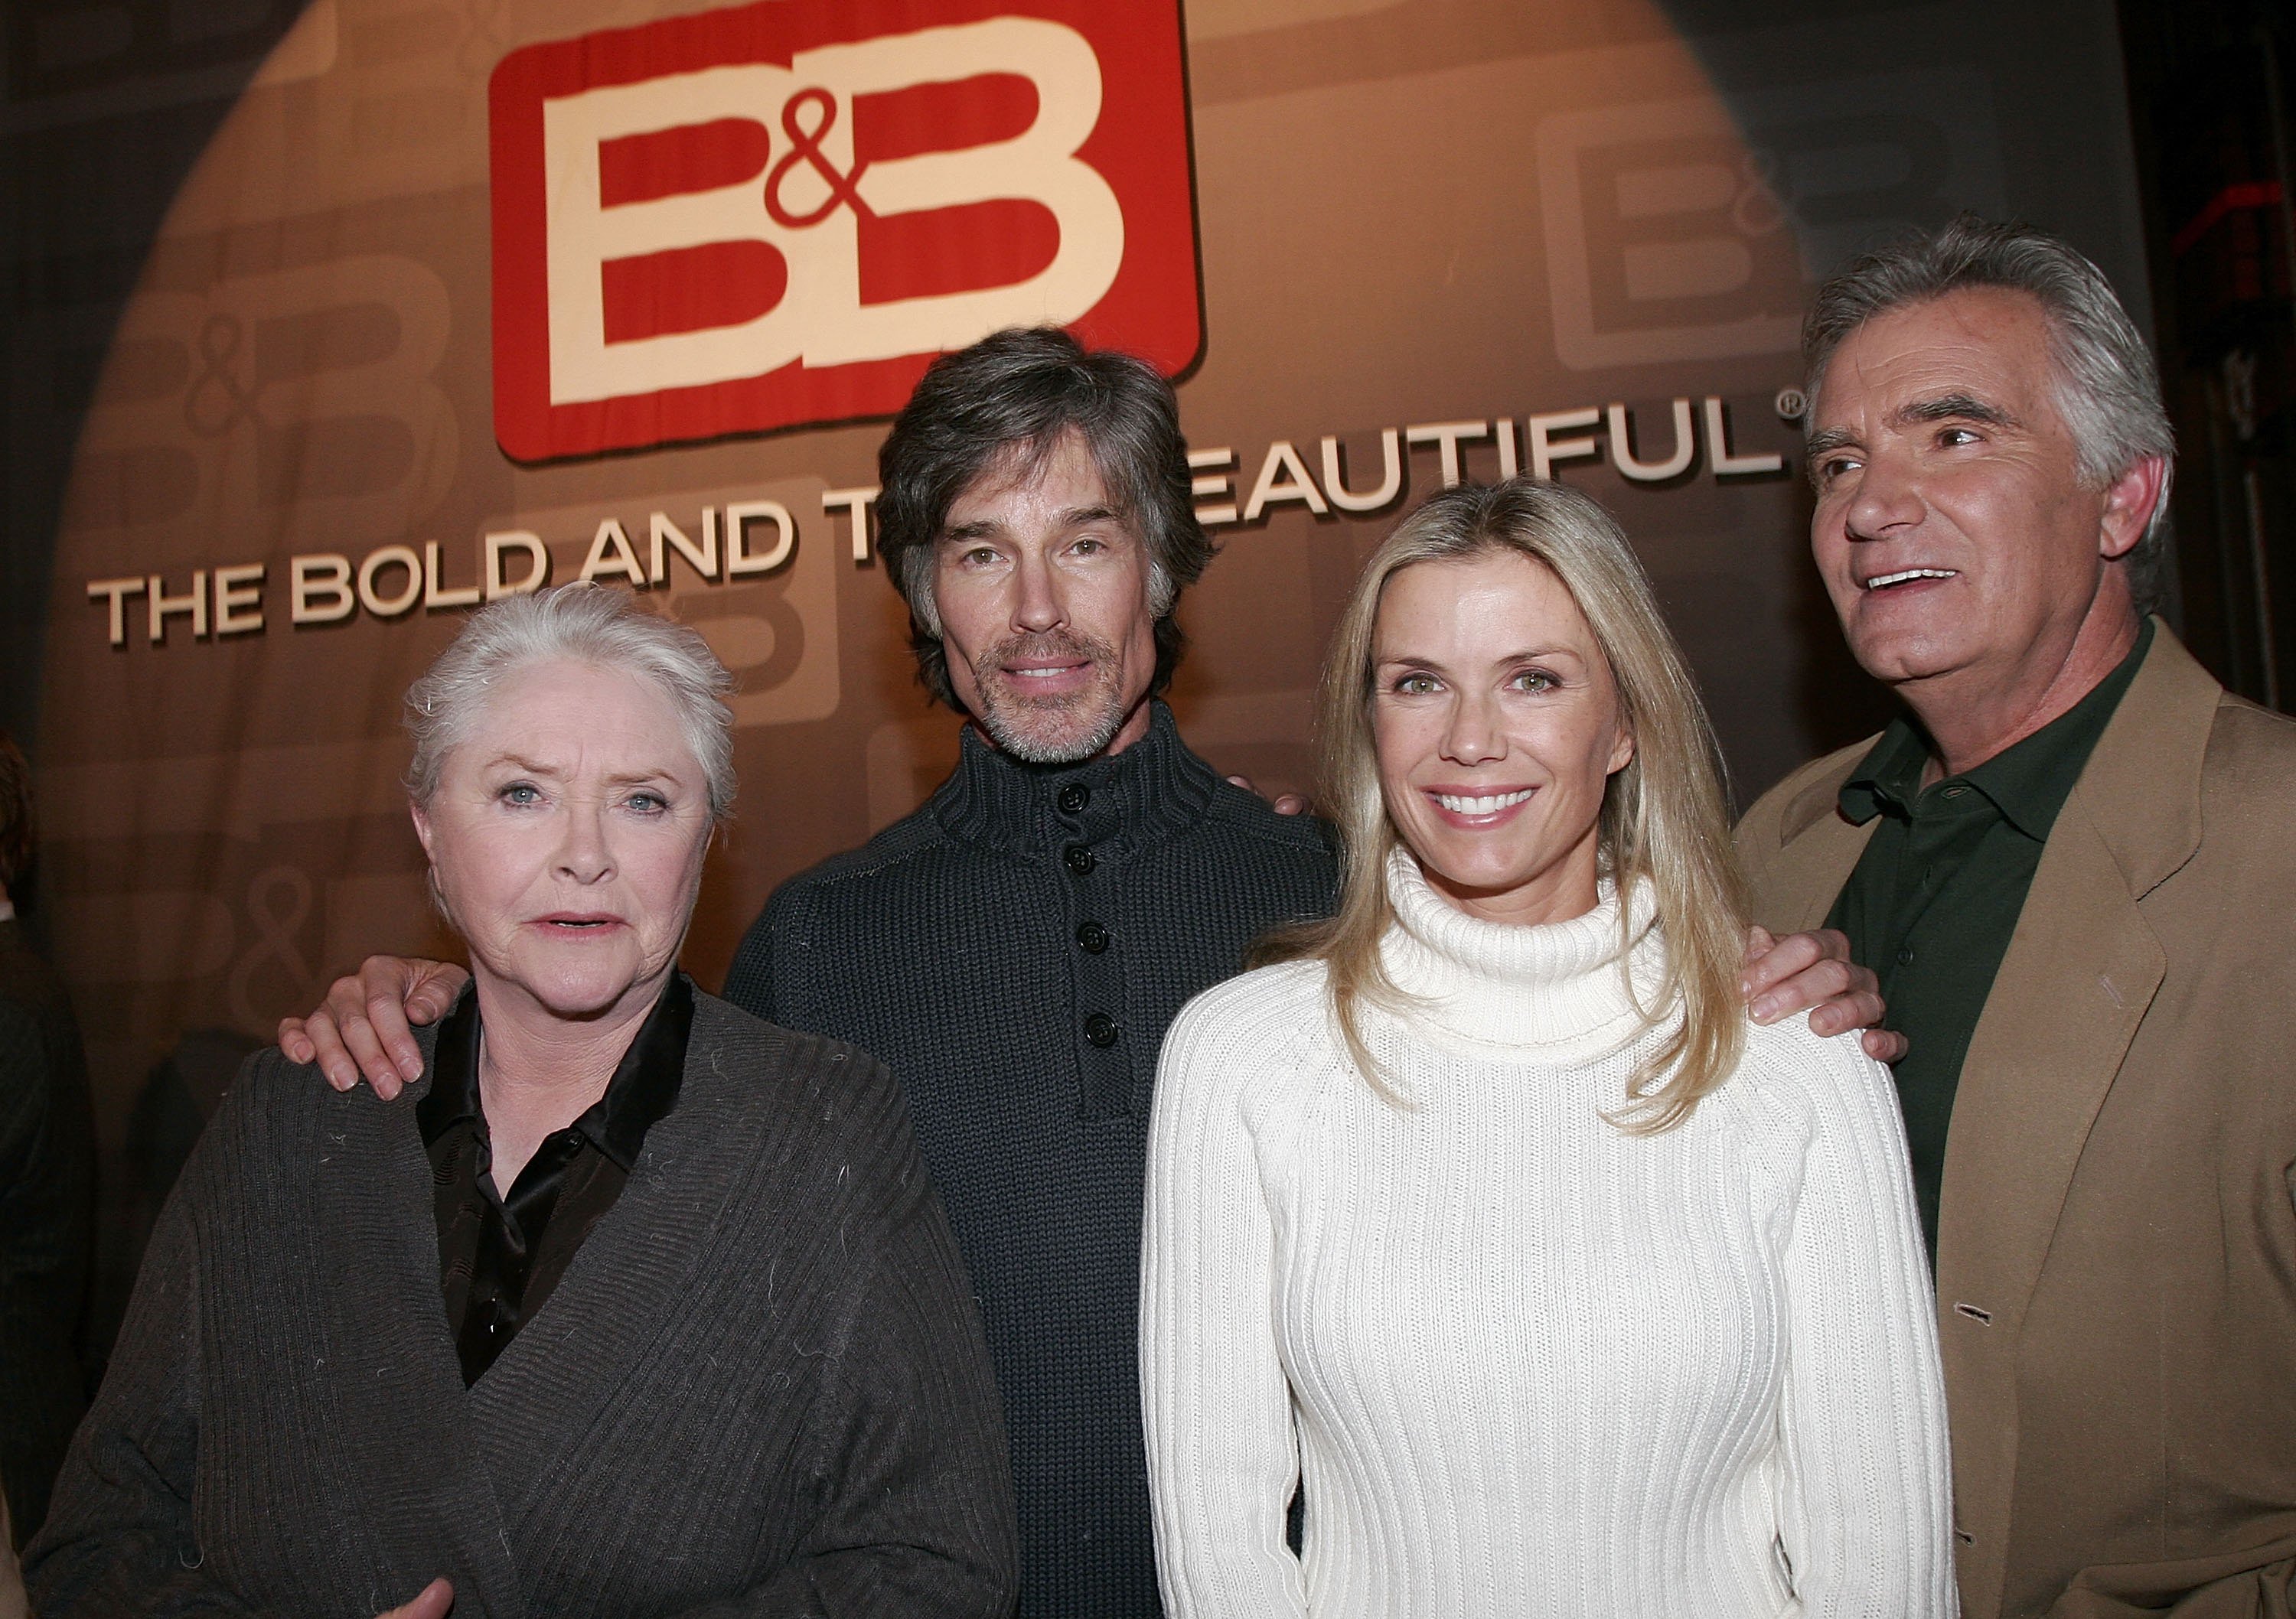 'The Bold and the Beautiful' stars Susan Flannery, Ronn Moss, Katherine Kelly Lang, and John McCook posing together onset during an anniversary celebration.